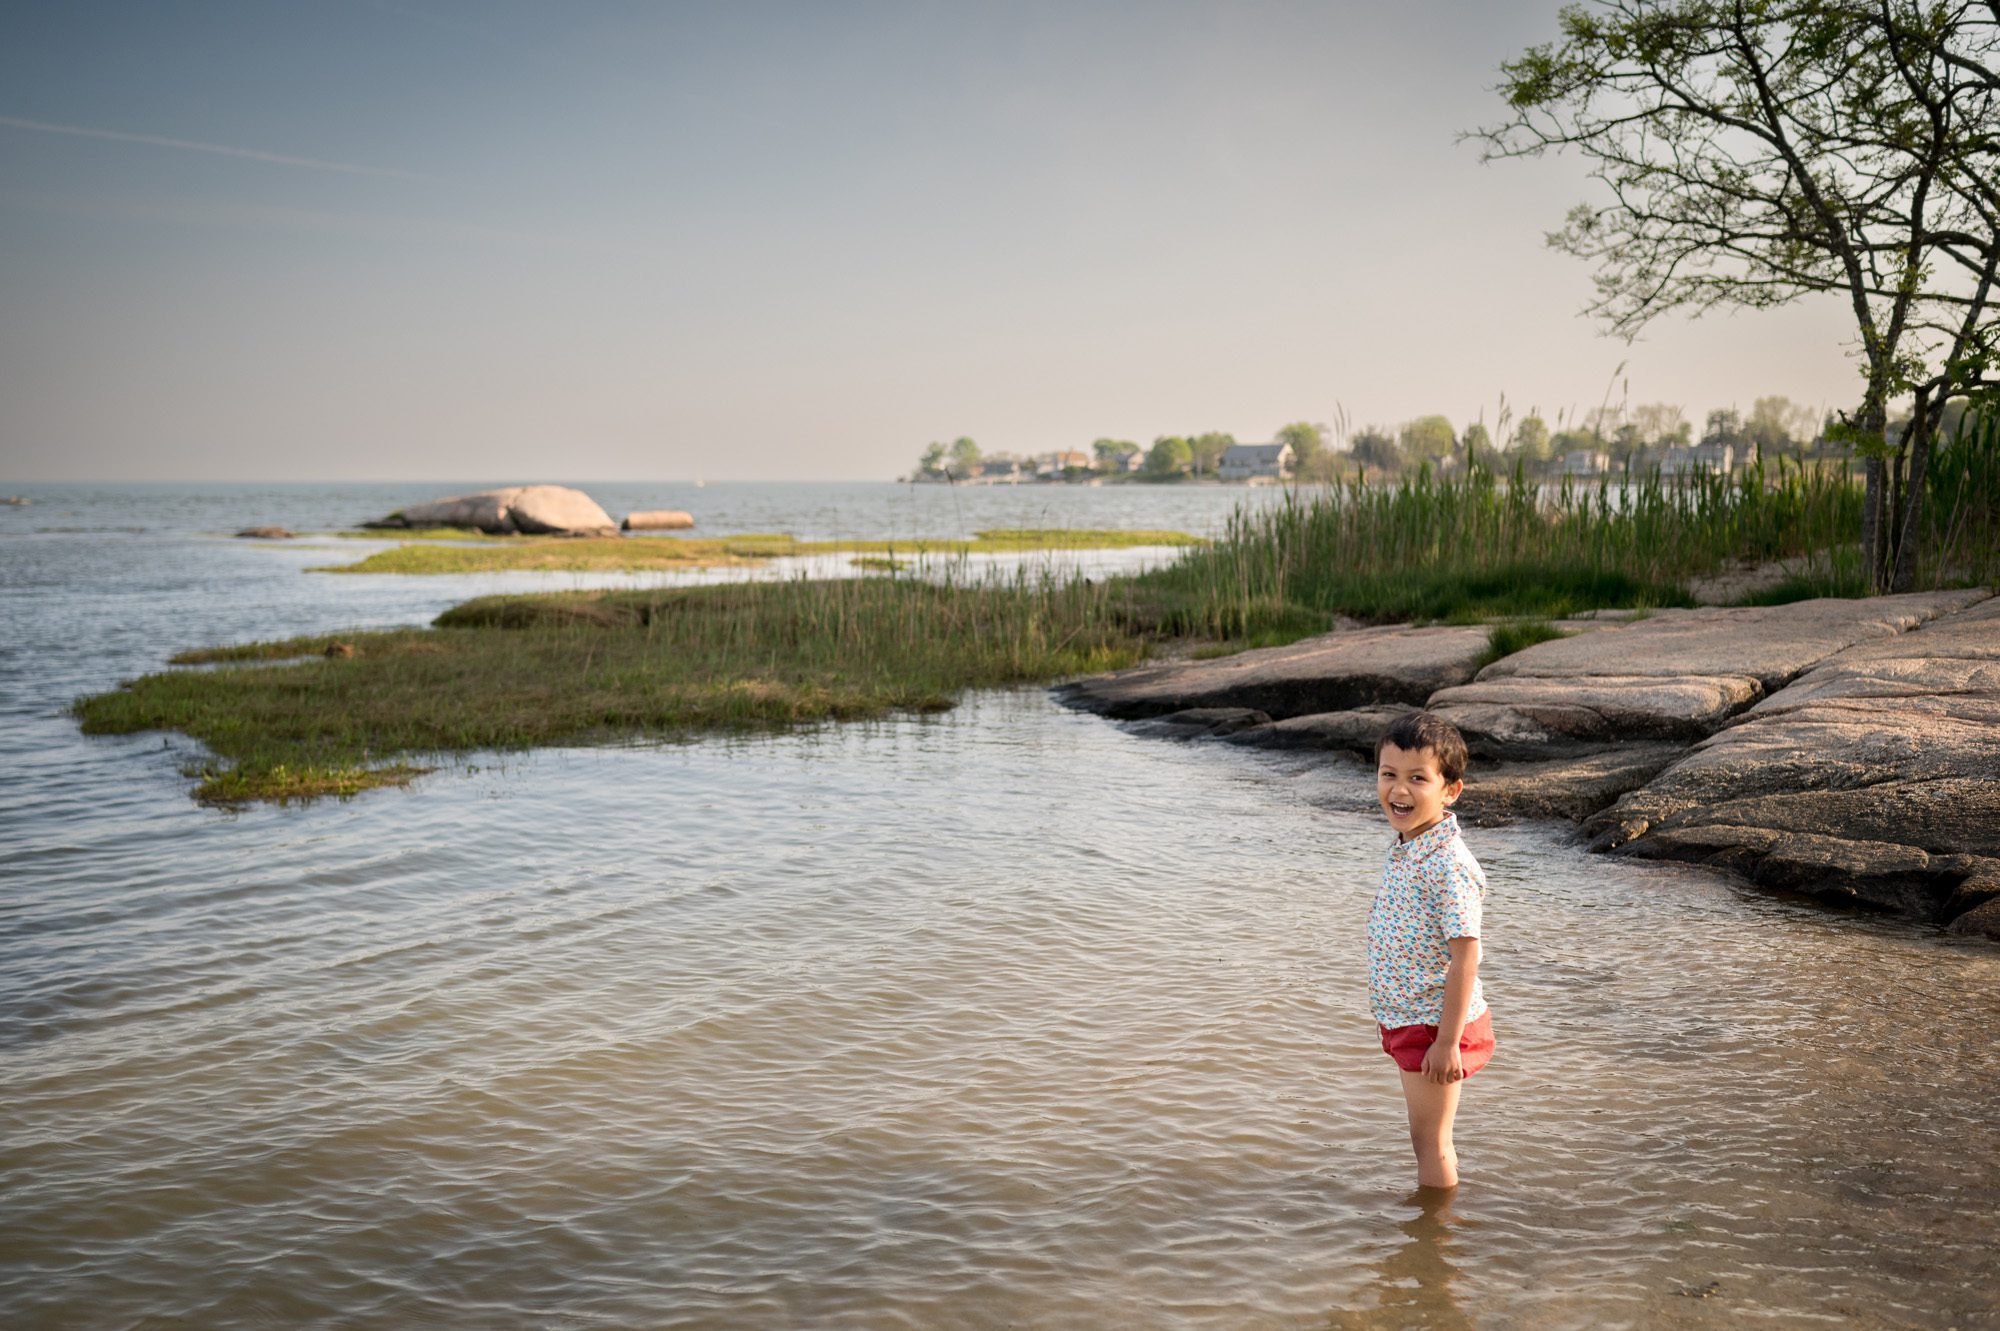 Boy wading in water